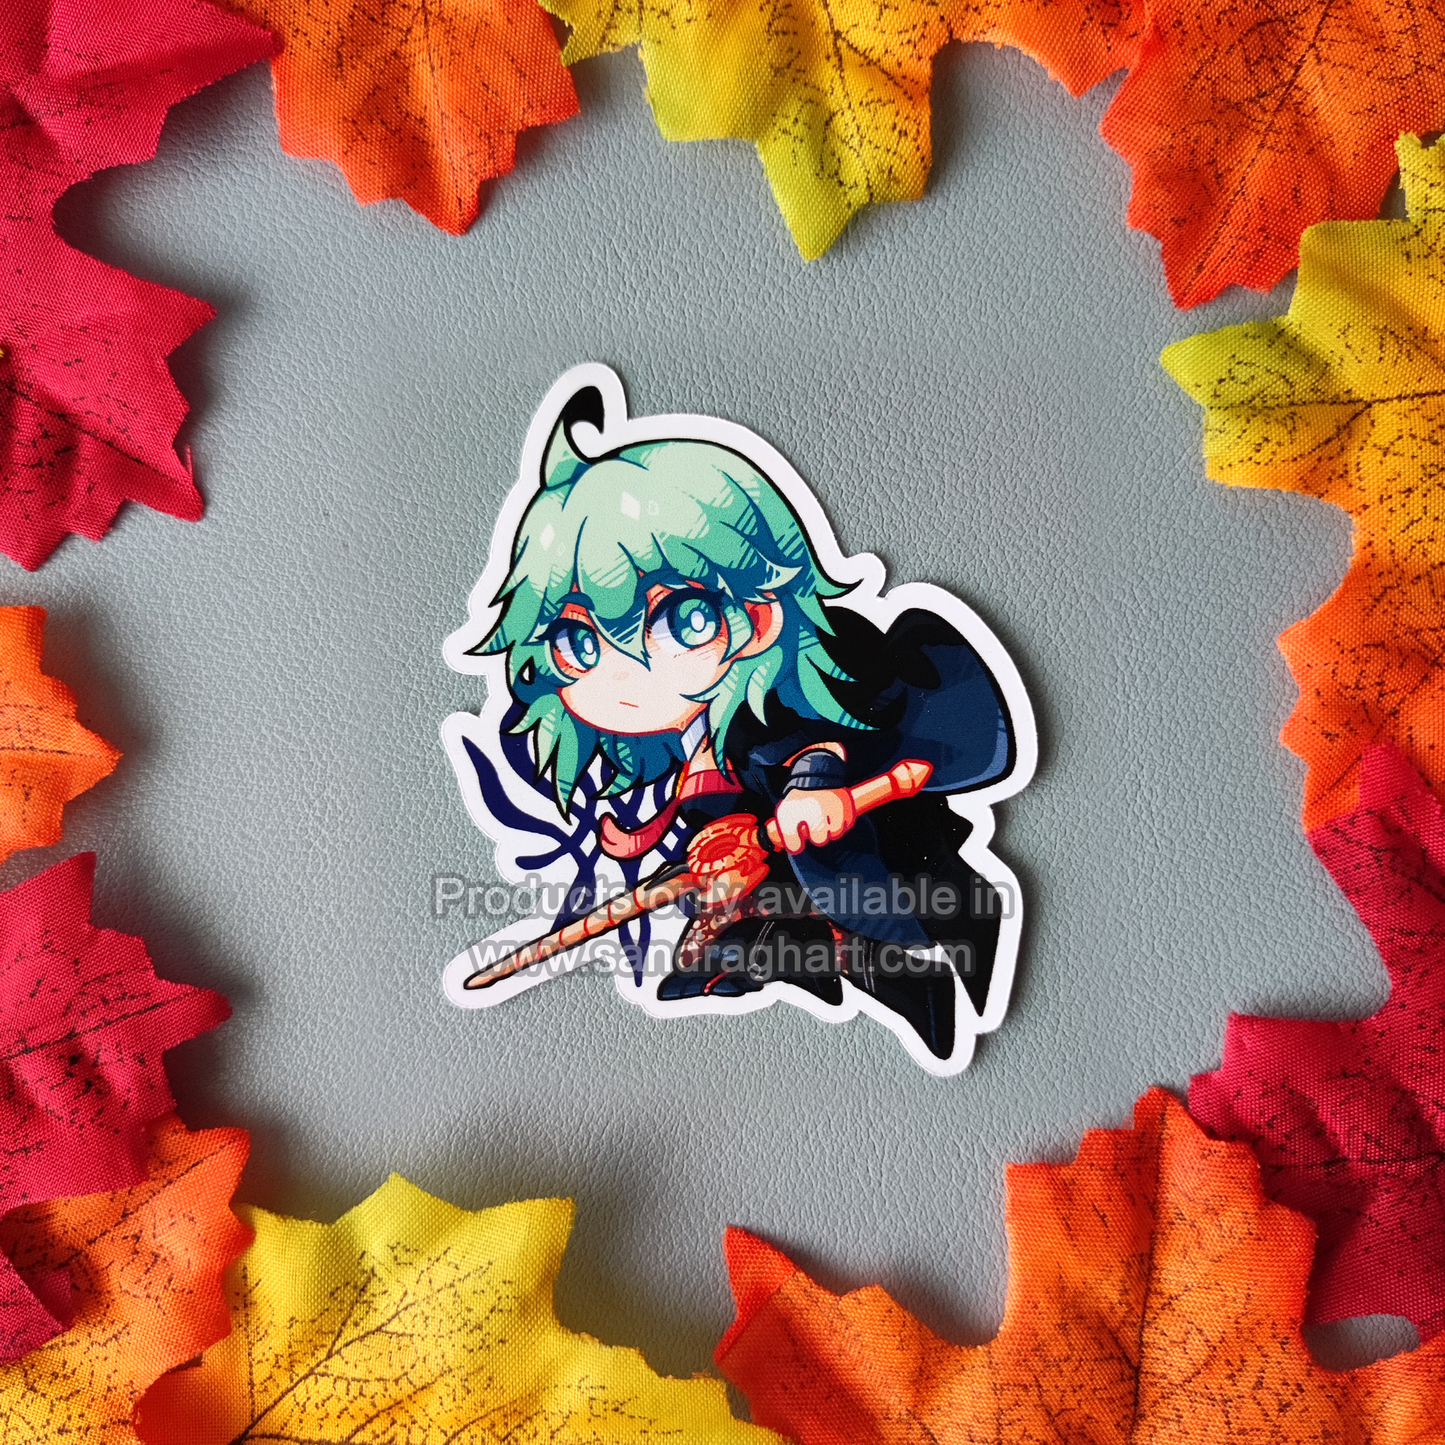 FE: TH Byleth Stickers